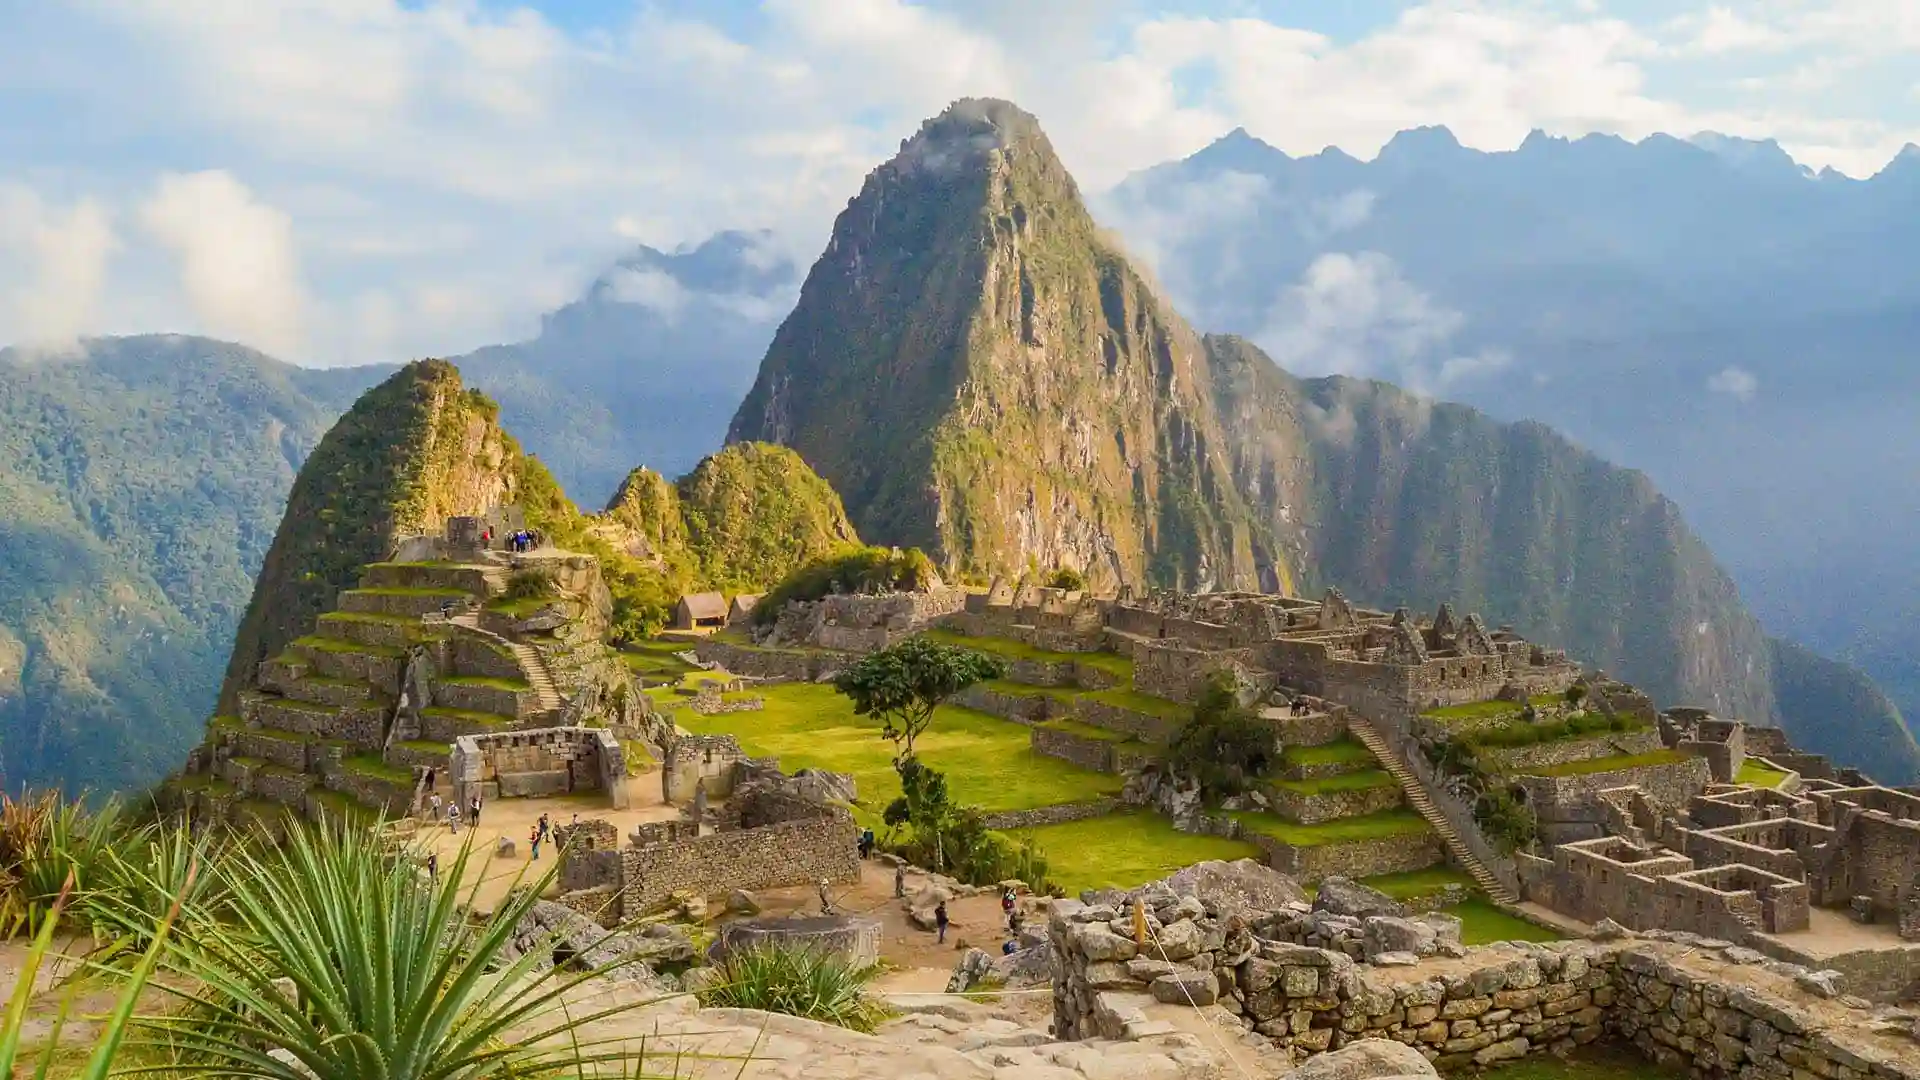 View of Machu Picchu, a UNESCO World Heritage Site, in South America.